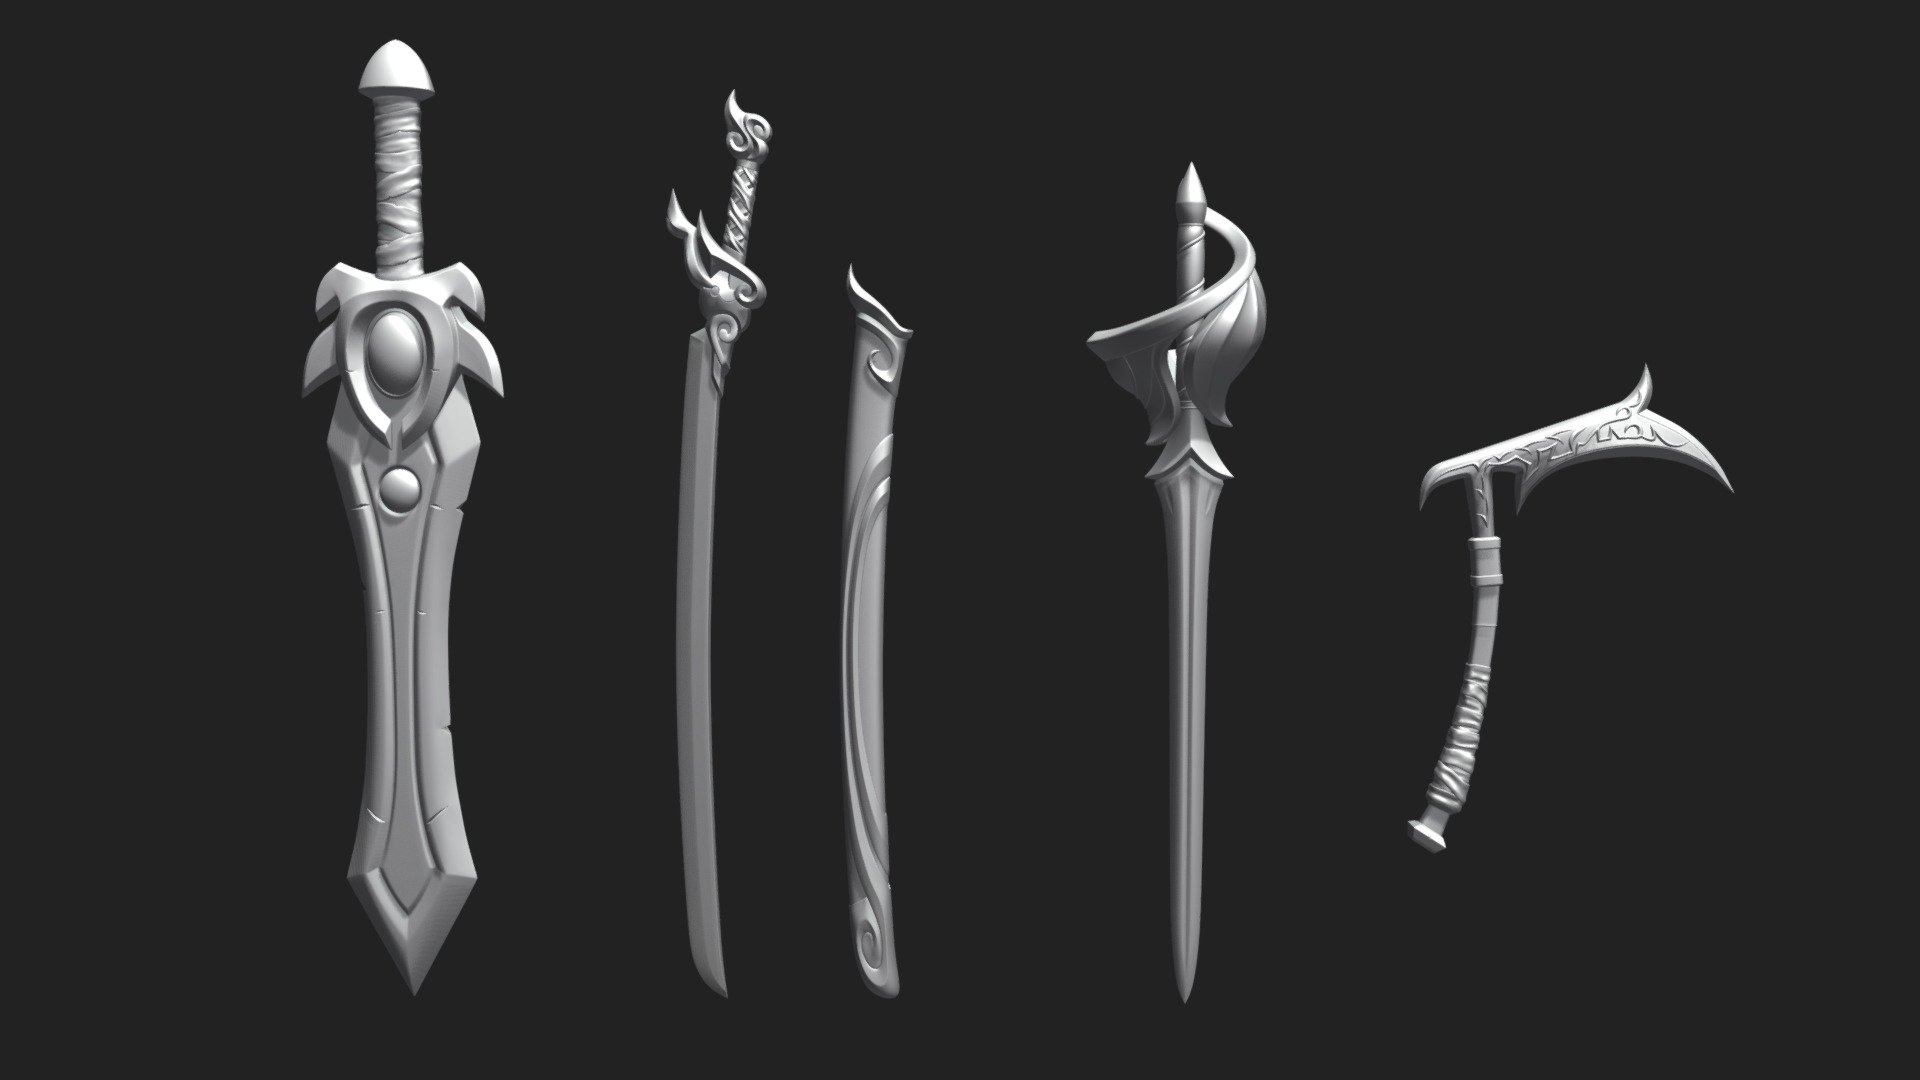 Selling on my artstation: https://www.artstation.com/caiocmgomes/store

Includes:


Akali Kai 
Fiora Sword
Garen Sword
Yasuo Sword and Sheath
 - League of Legends Weapons - 3D model by Caio Cesar M. Gomes (@caiocmgomes) 3d model